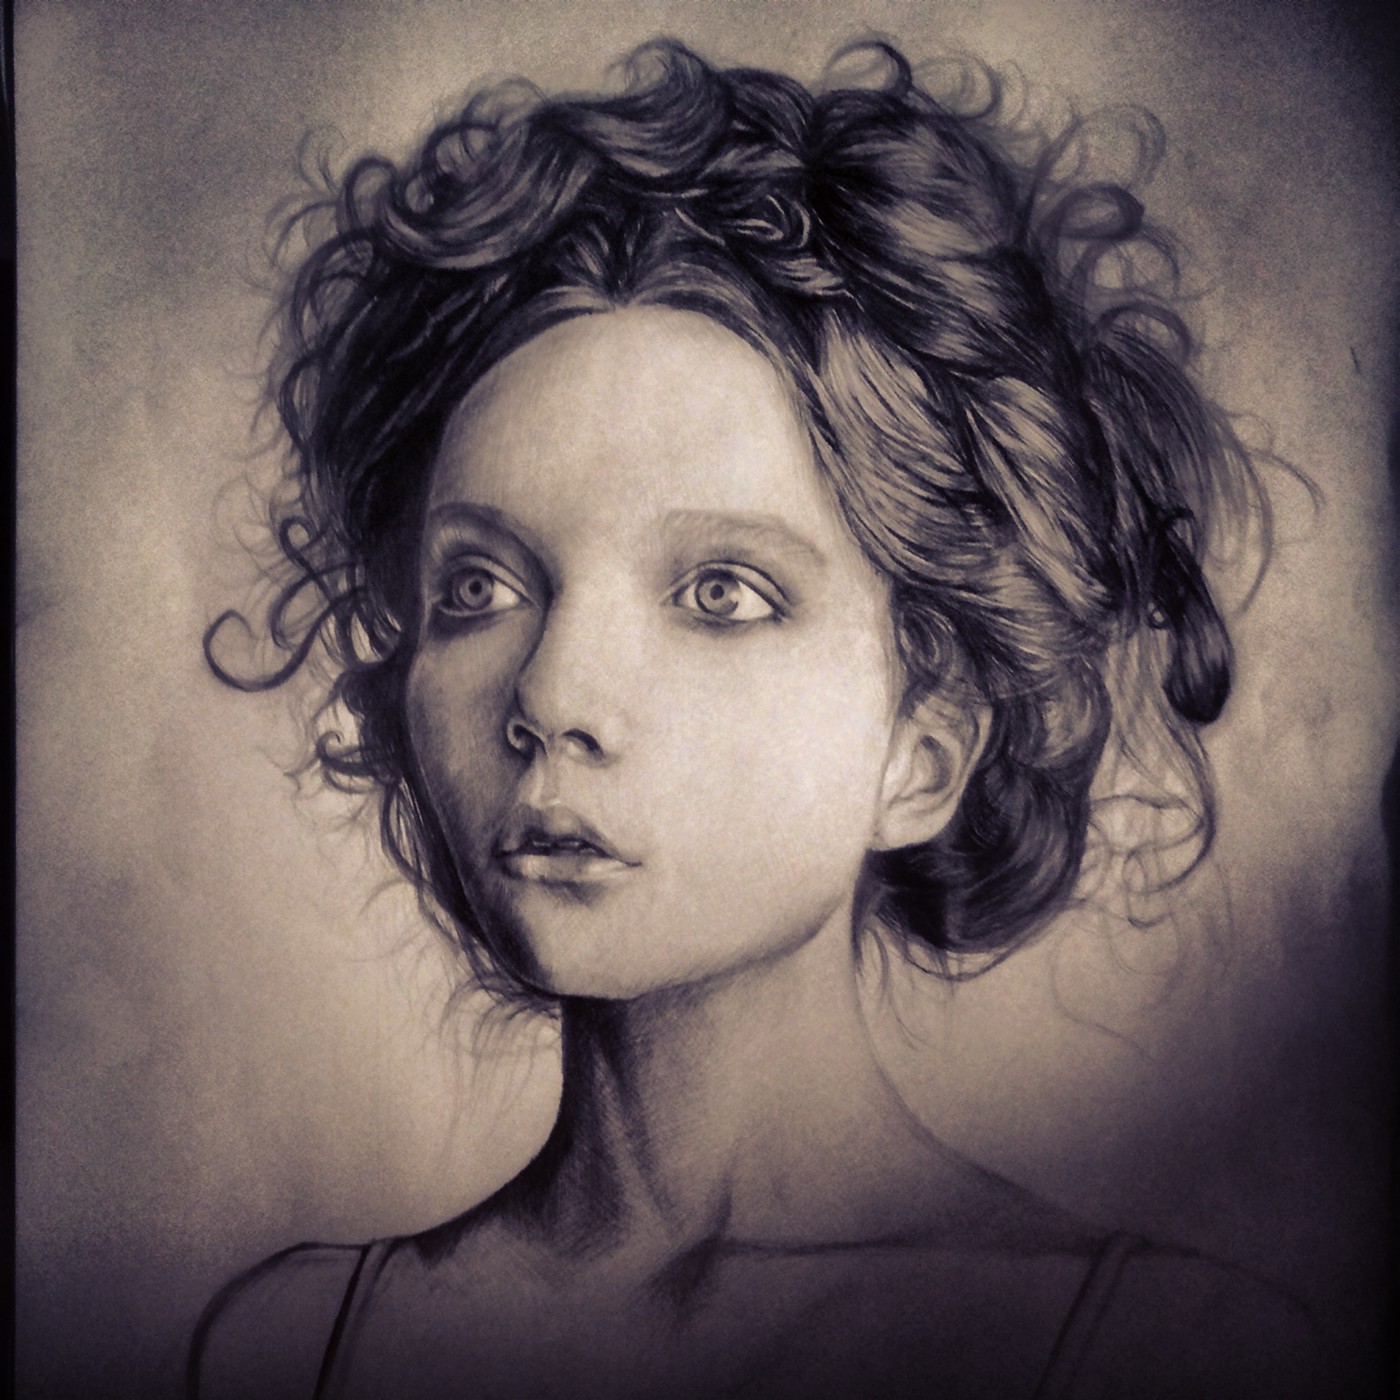 school assignment basic illustration pencil drawing on Behance